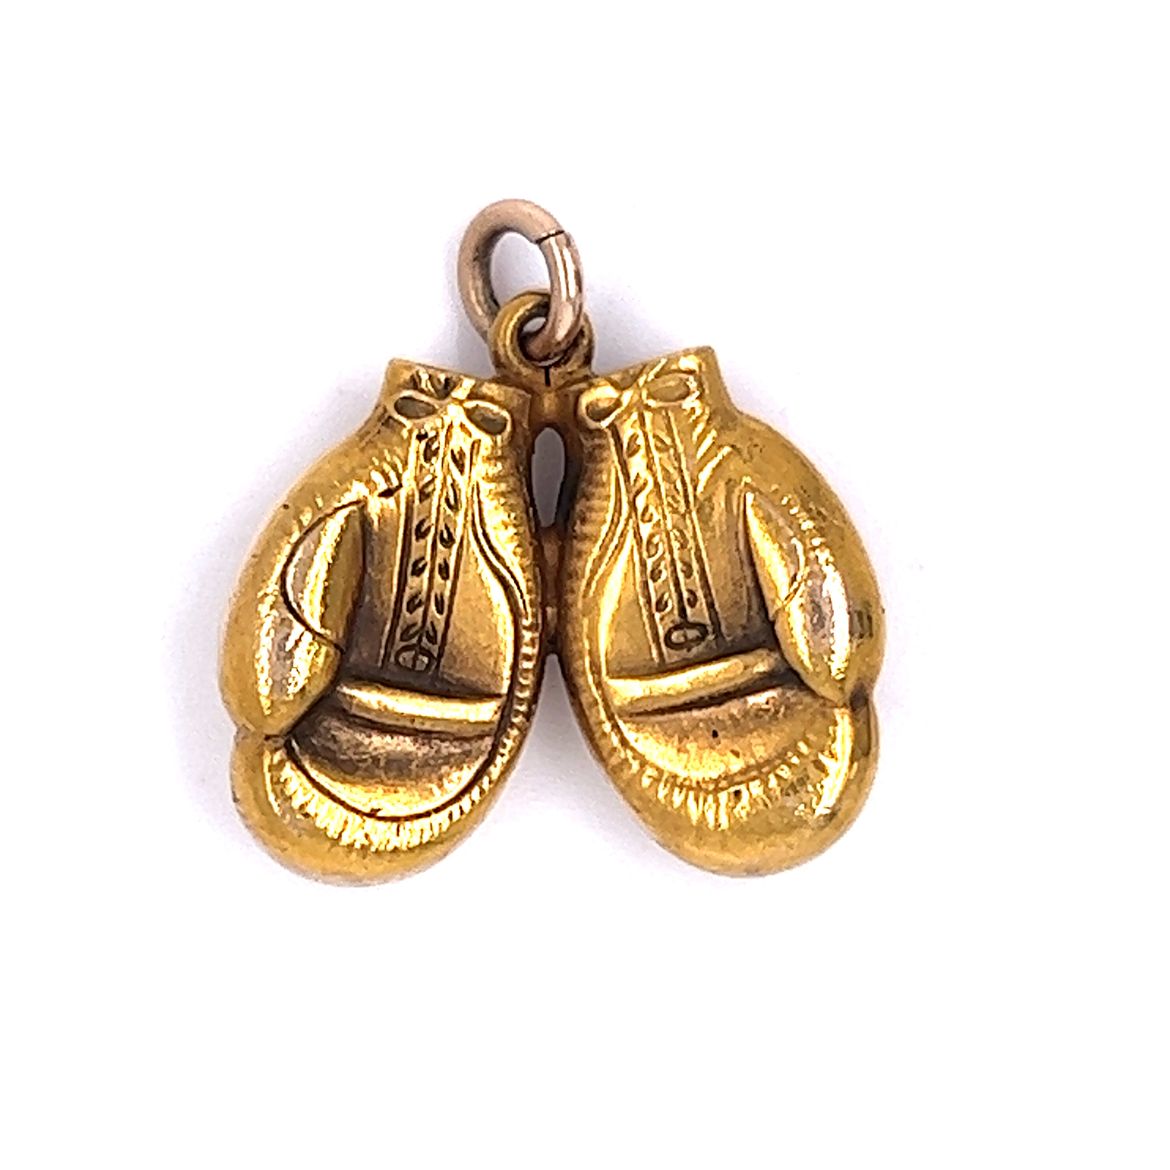 Vintage Boxing Glove Charm in 10k Yellow Gold